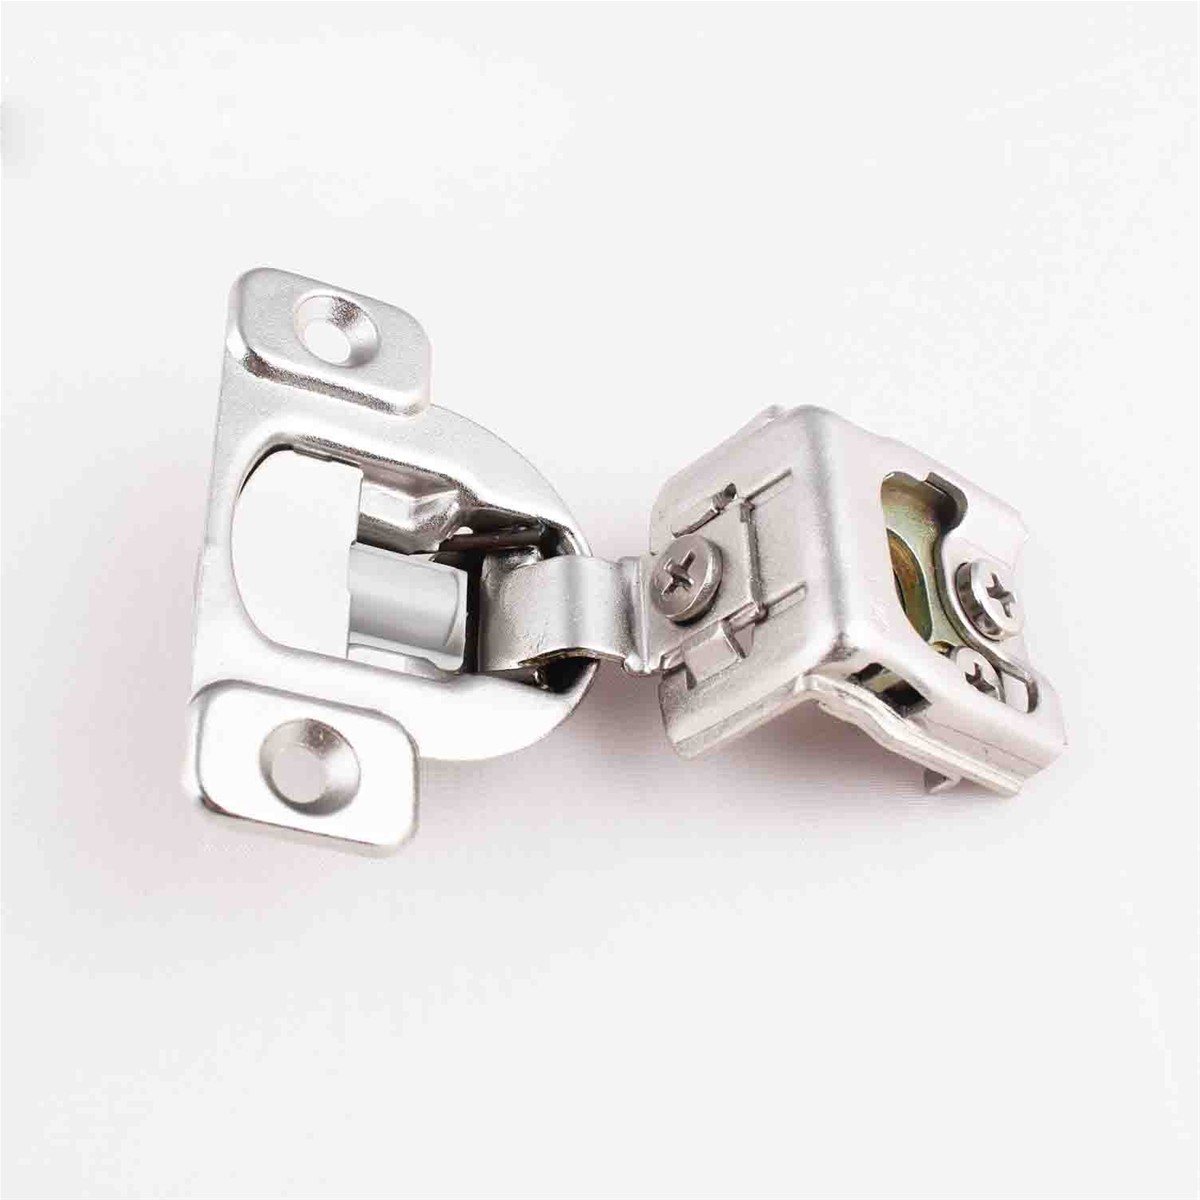 3d Fast Transfer American Hinge For Cabinet Door From China